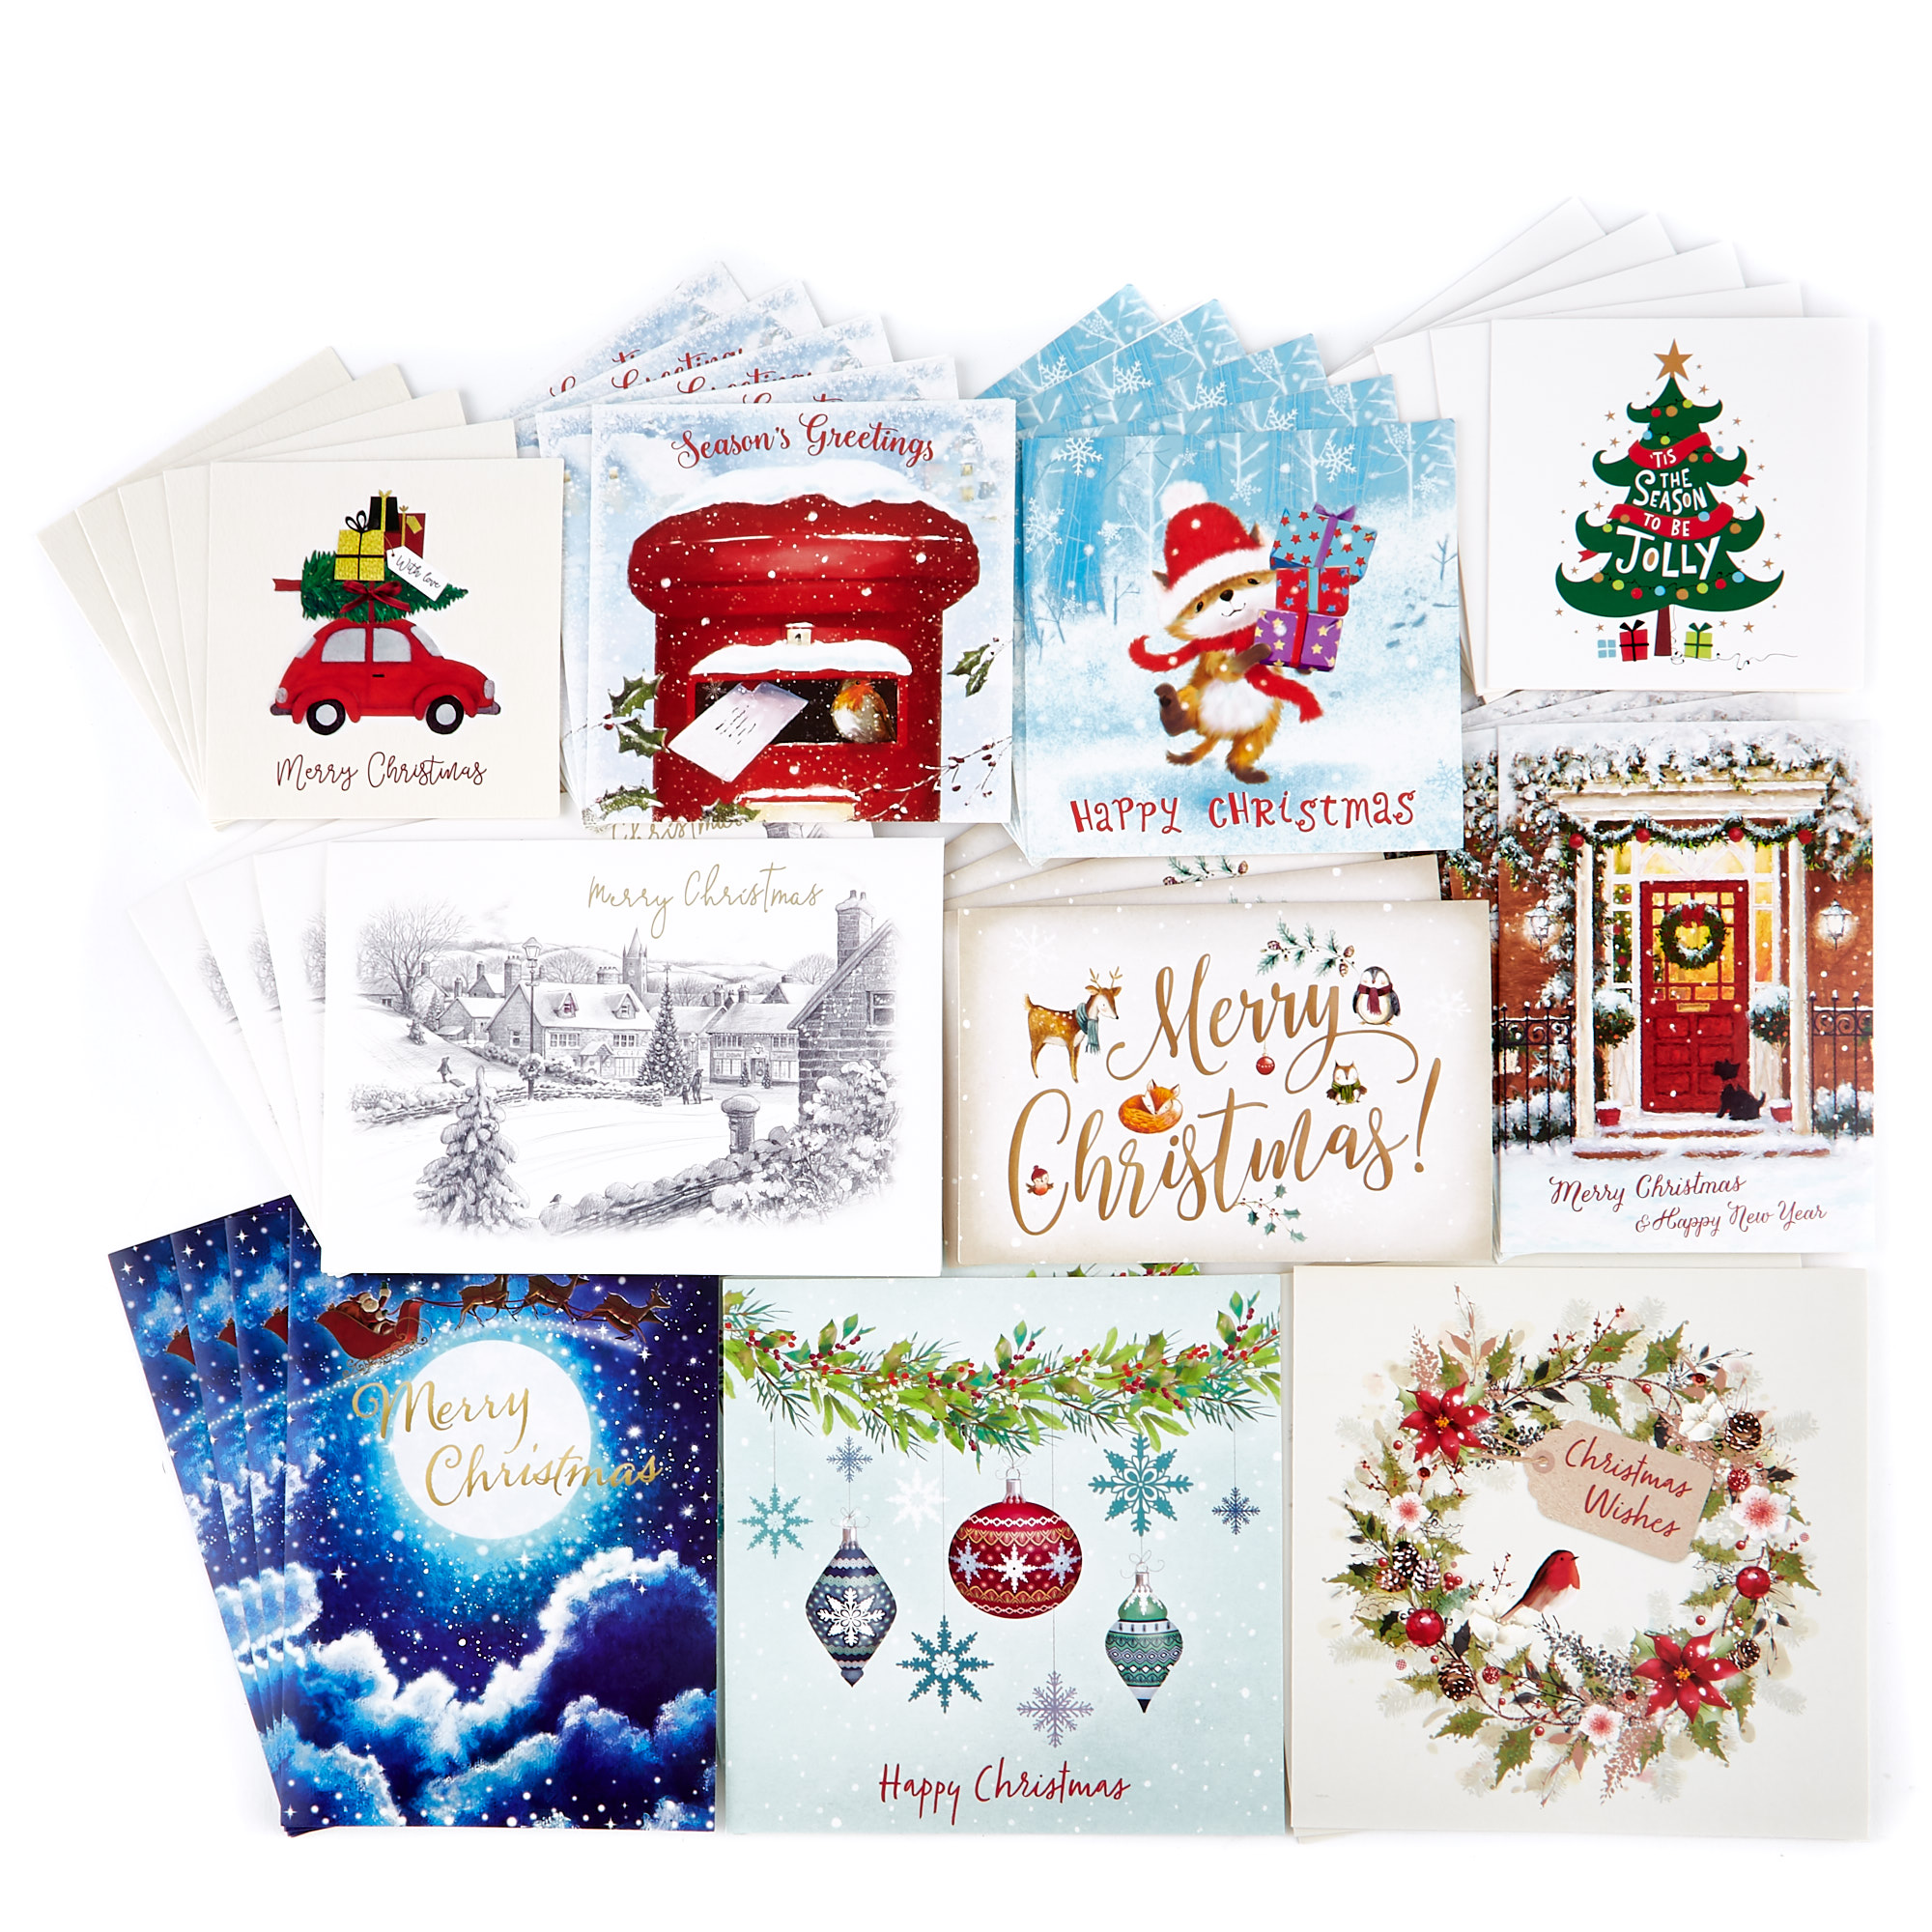 Boxed Value Christmas Cards - Pack of 50 | Card Factory